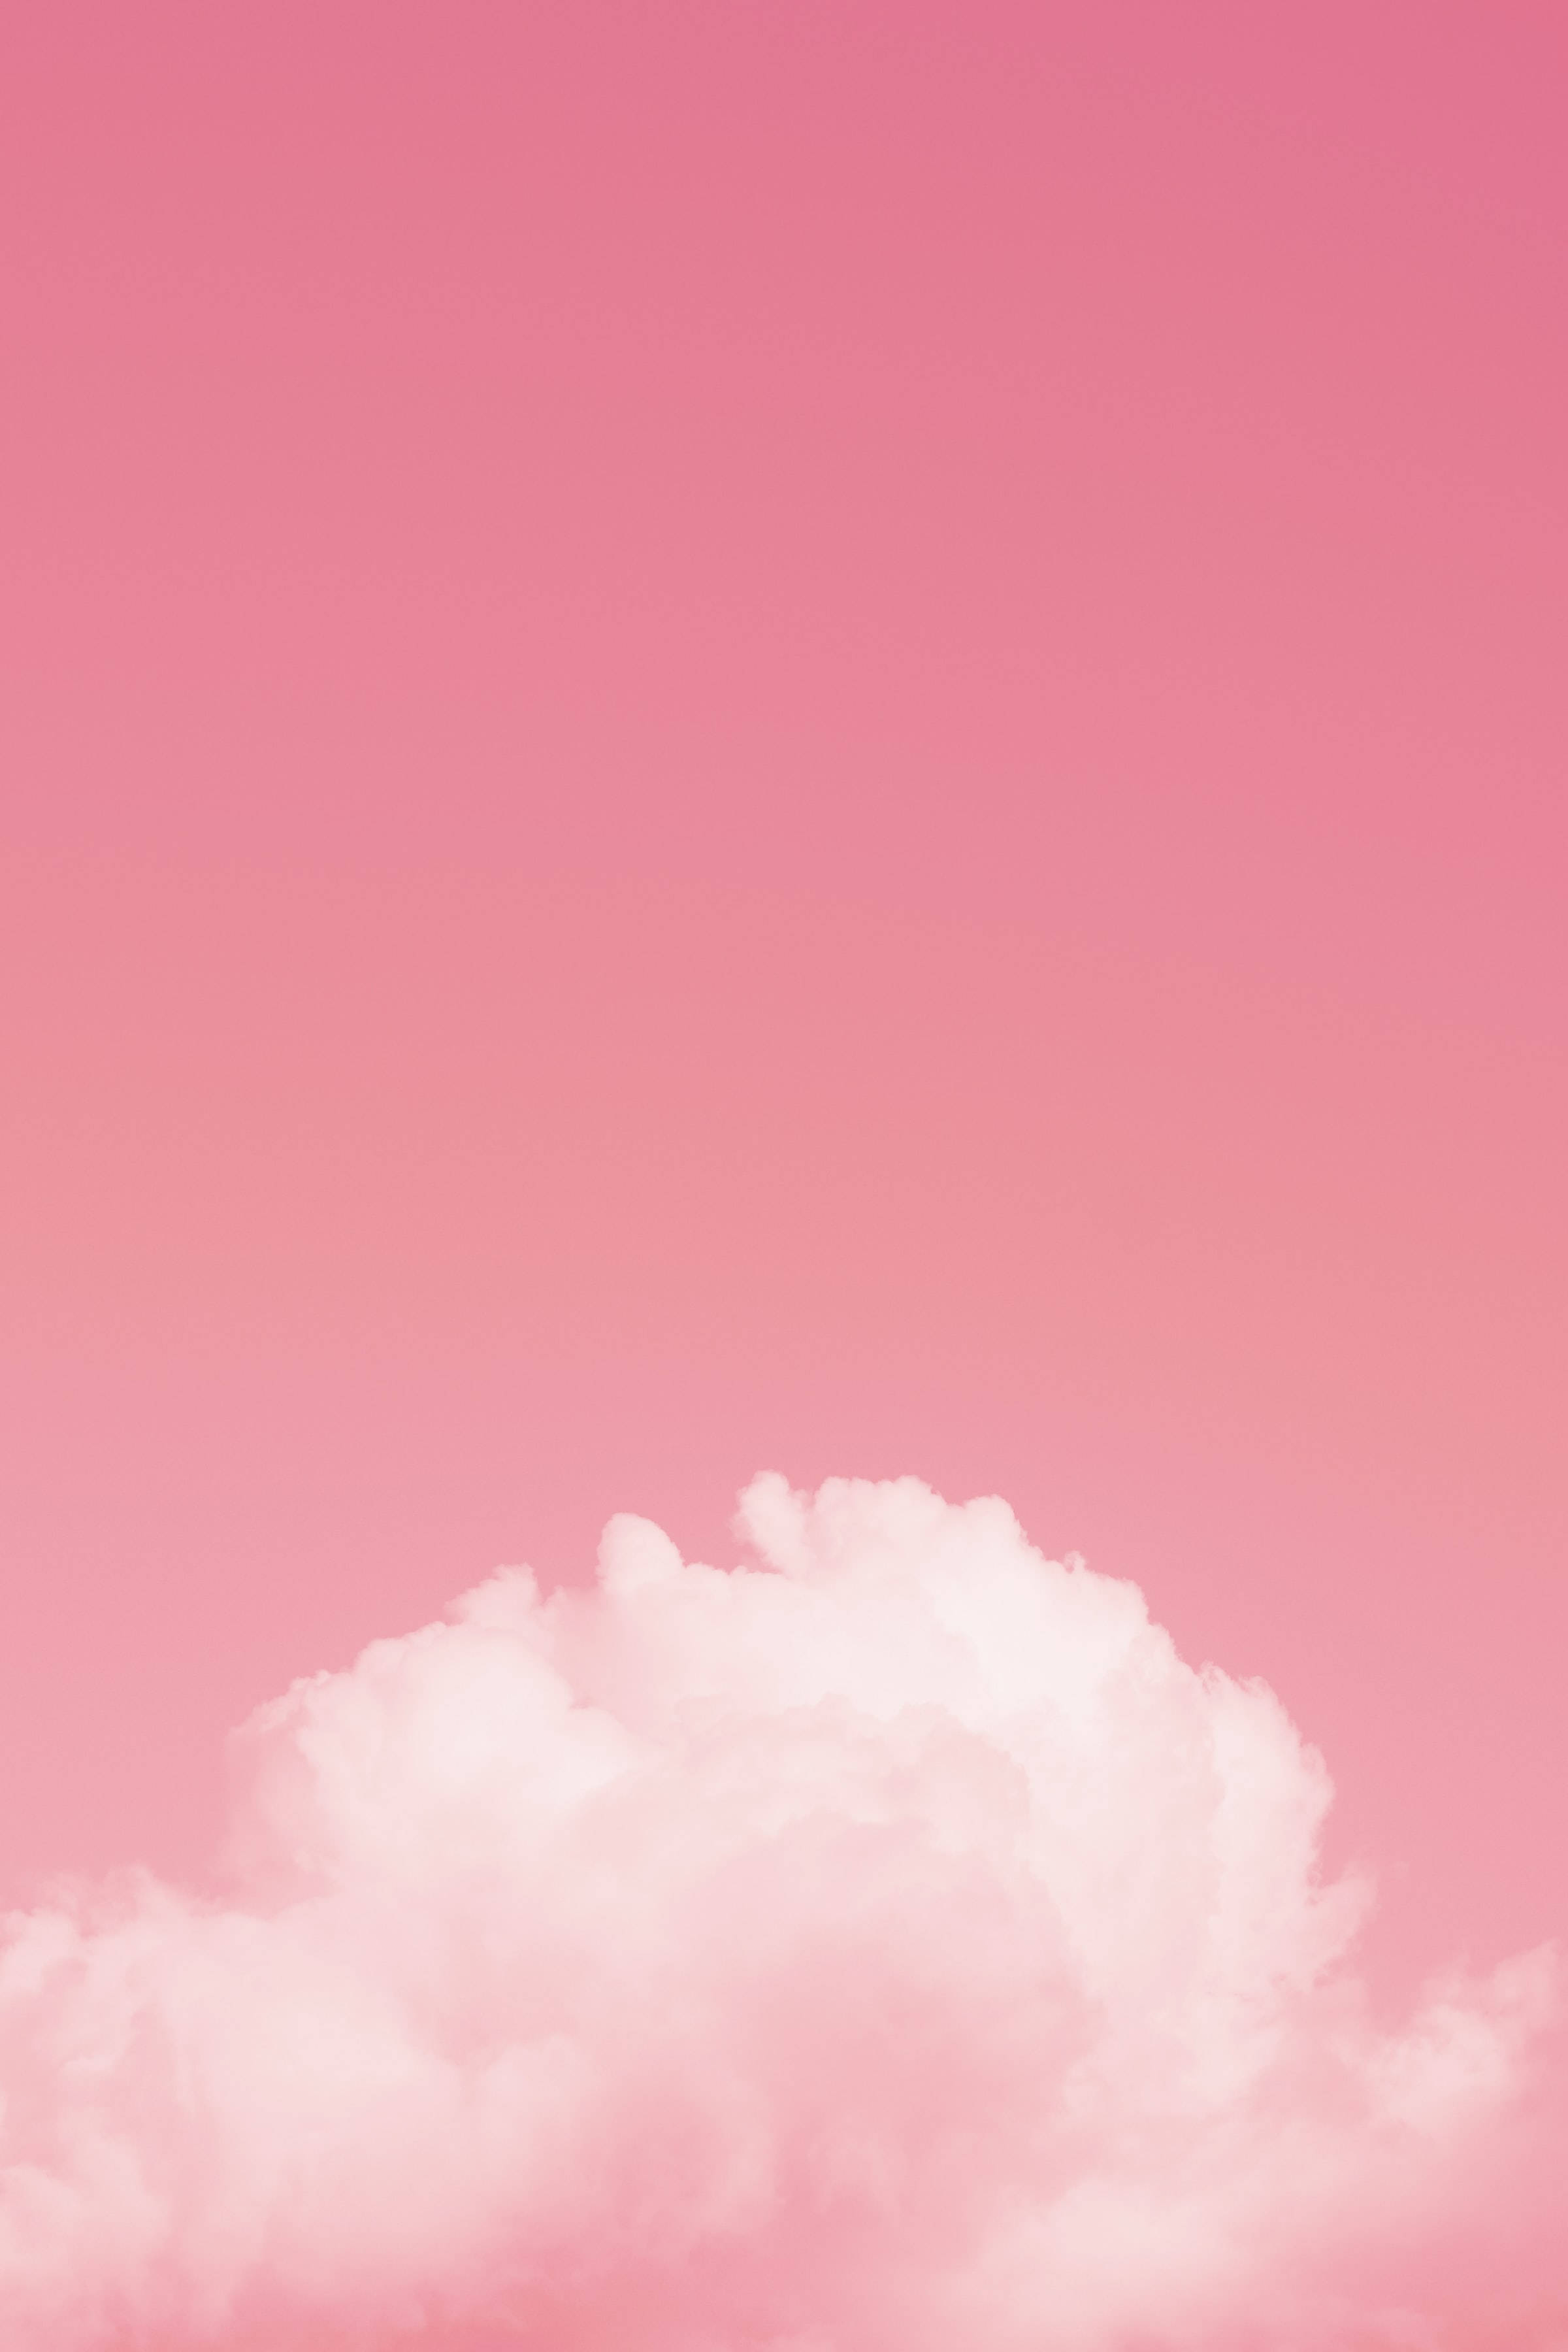 Cute Pink Aesthetic White Fluffy Cloud